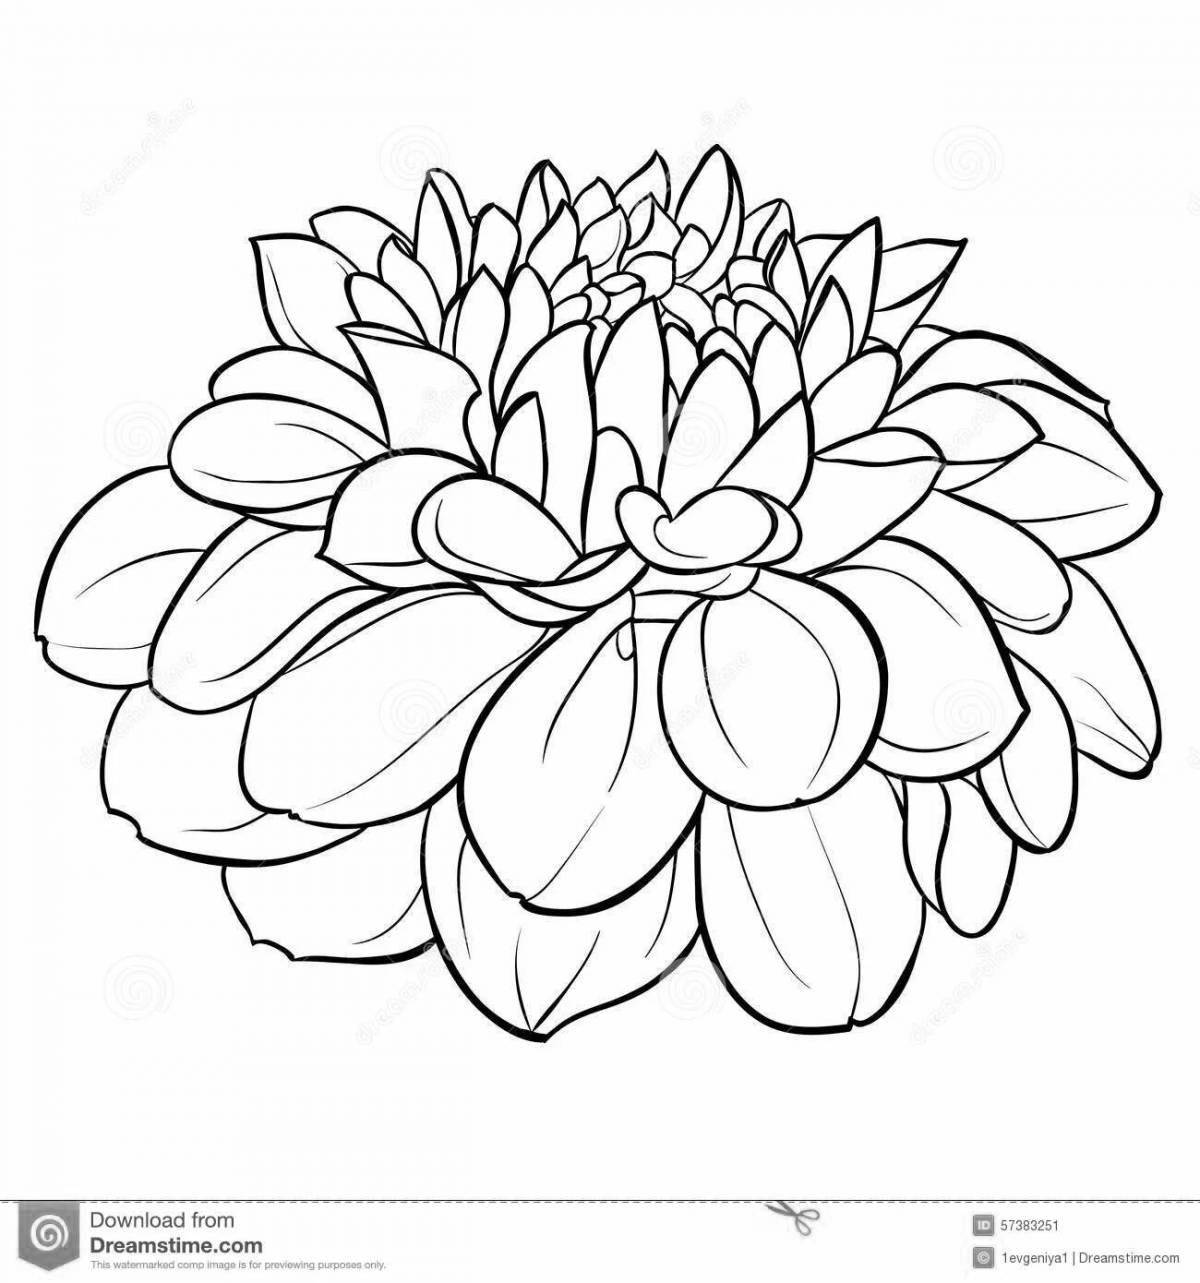 Playful dahlia coloring page